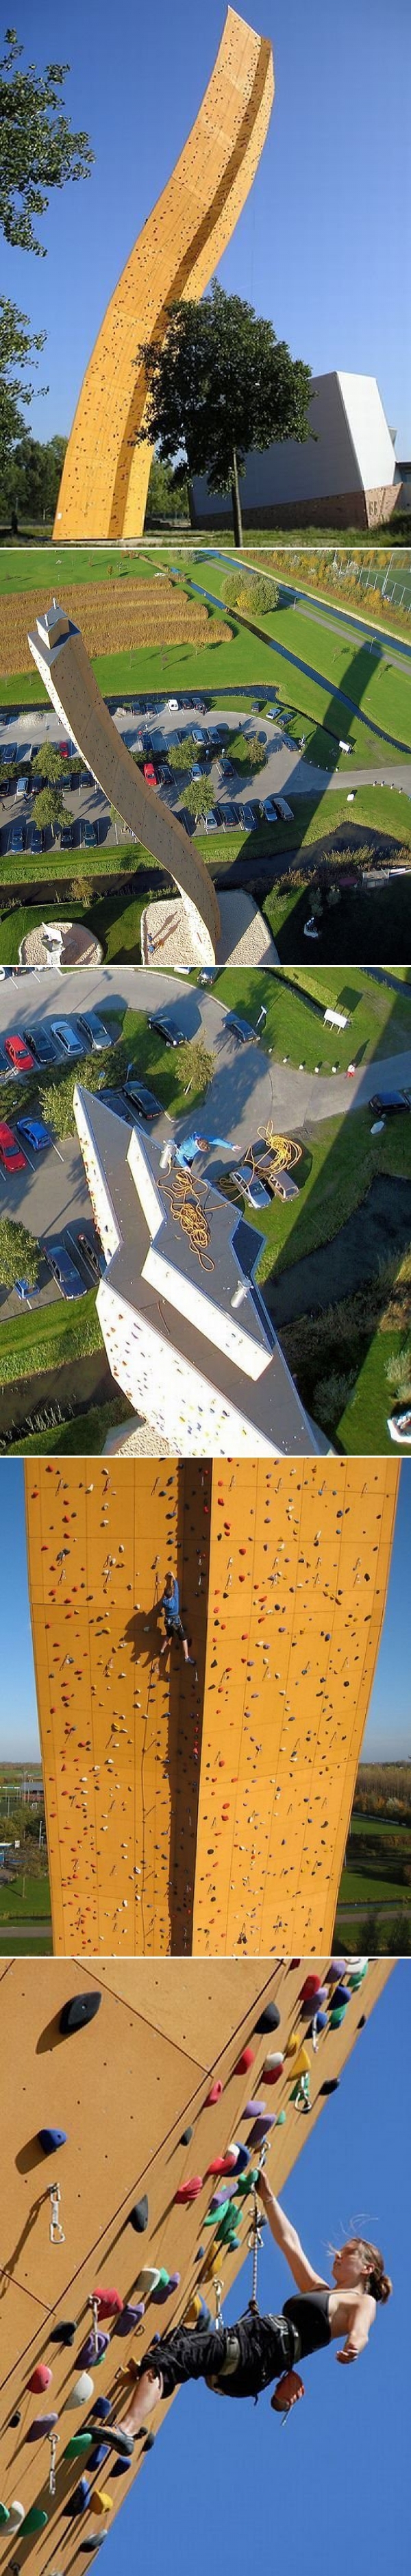 Excalibur is a high climbing wall in Holland. - Rock climbing, Excalibur, Holland, Longpost, Netherlands (Holland)